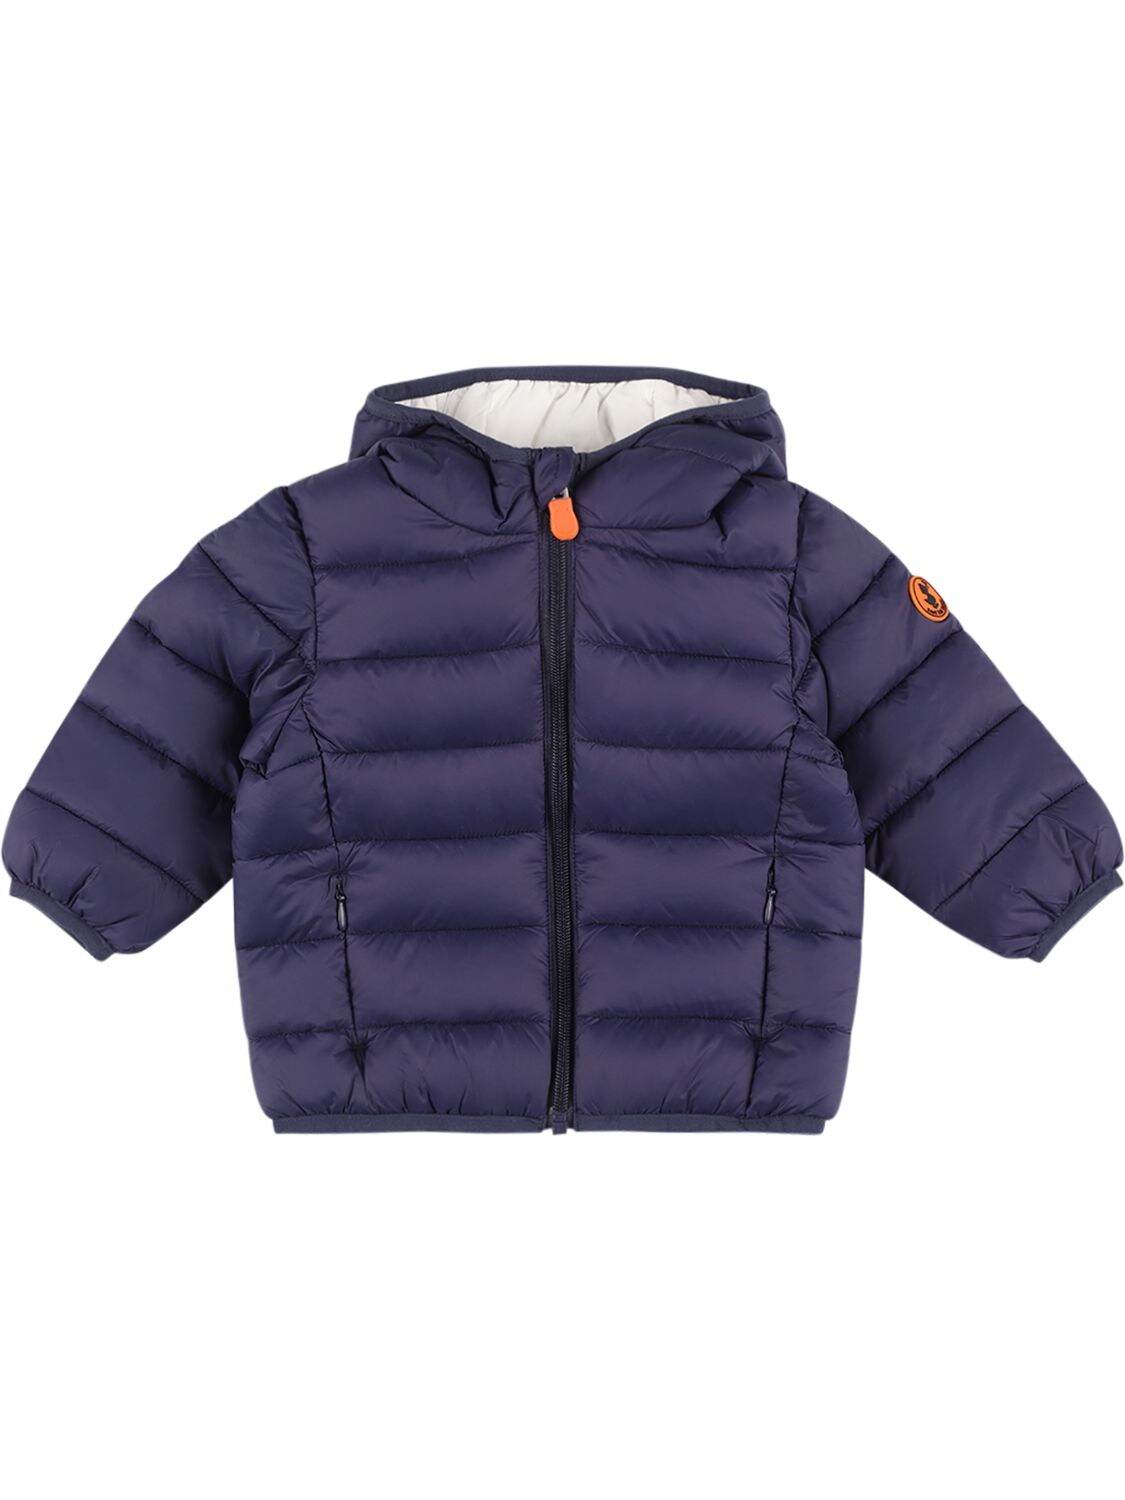 Save The Duck Babies' Hooded Nylon Puffer Jacket In Navy